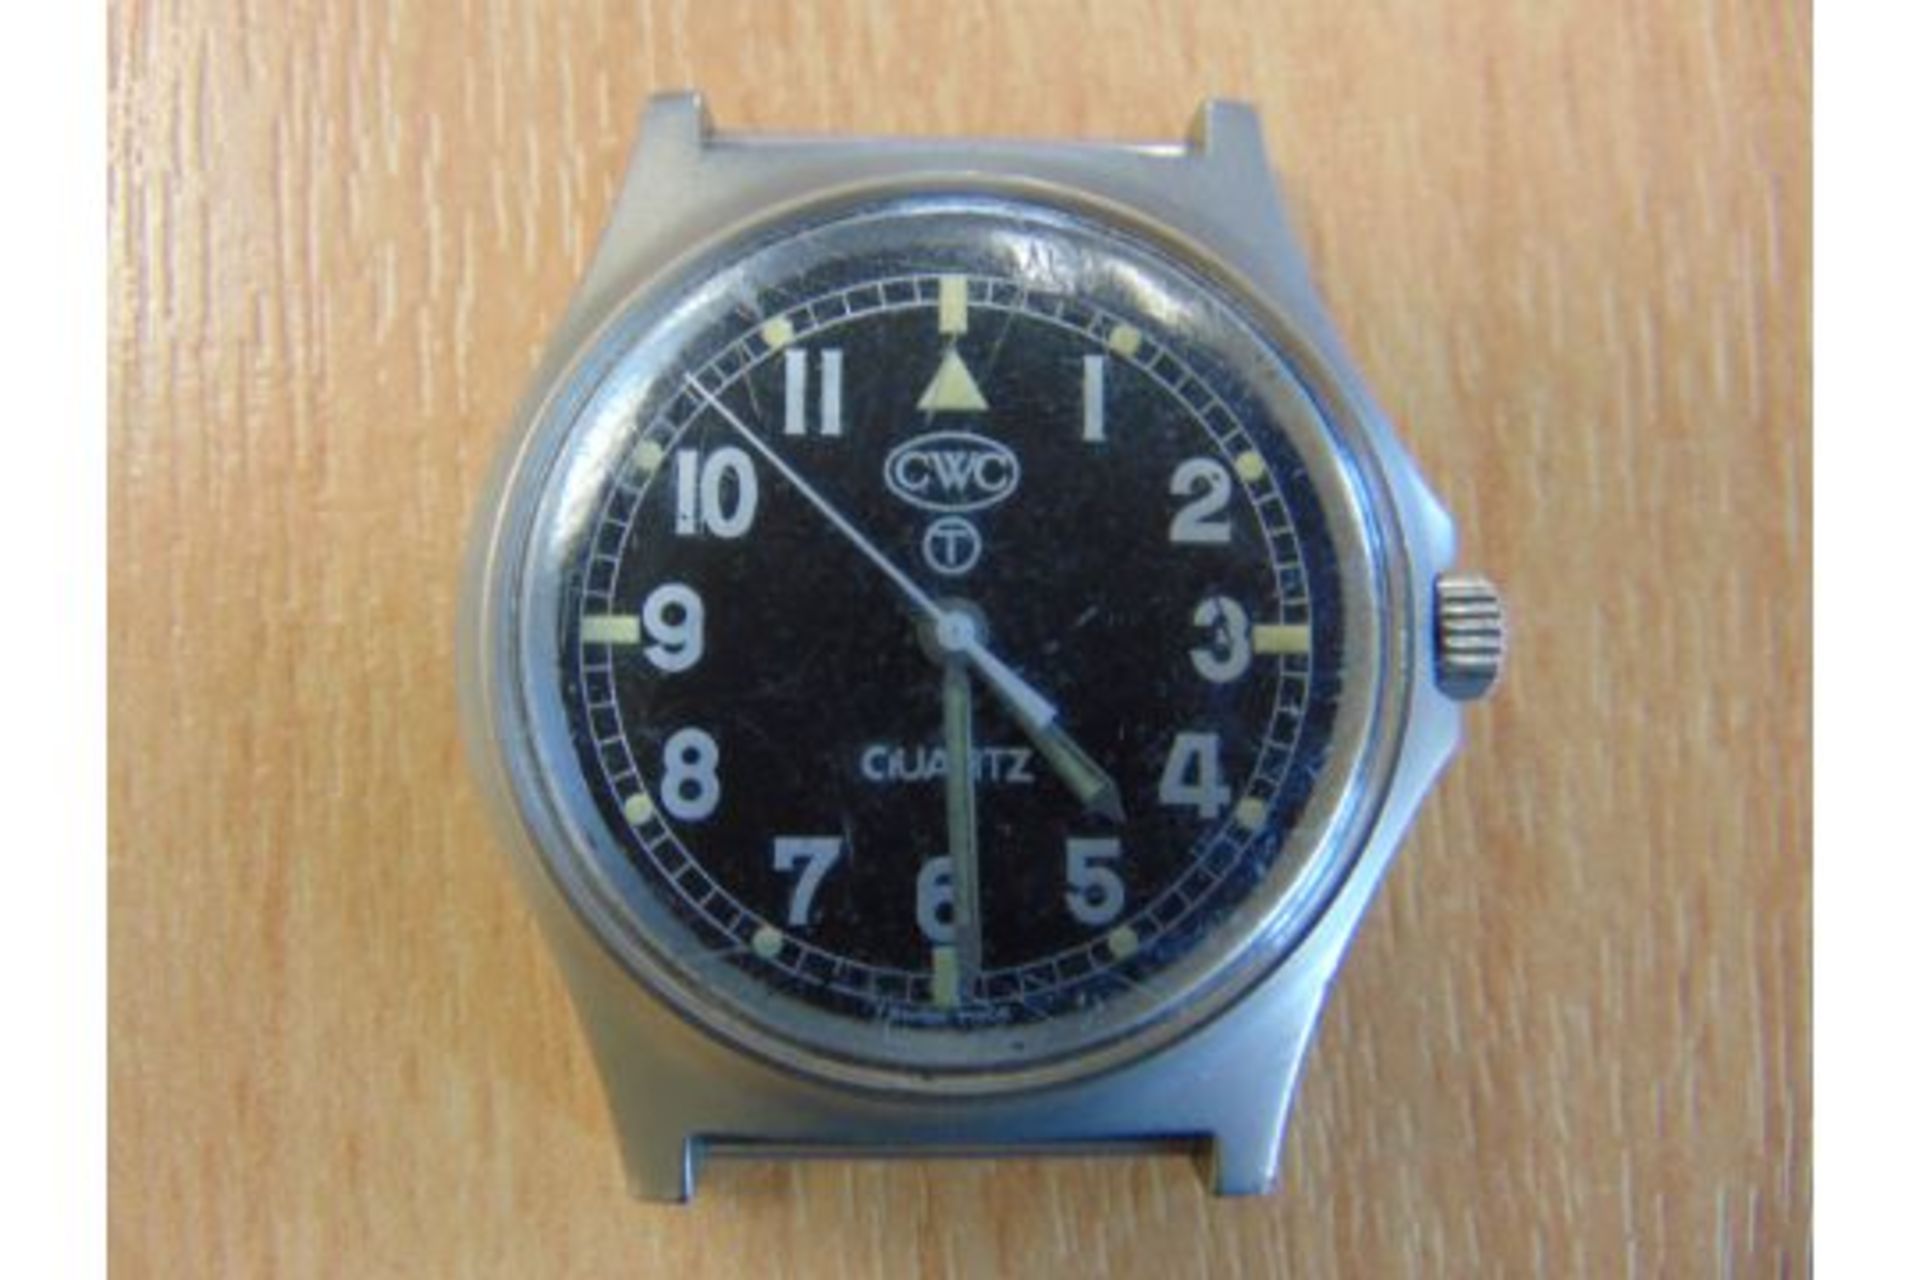 CWC (Cabot Watch Co Switzerland), British Army W10 Service Watch Nato Marks, Water Resistant to 5ATM